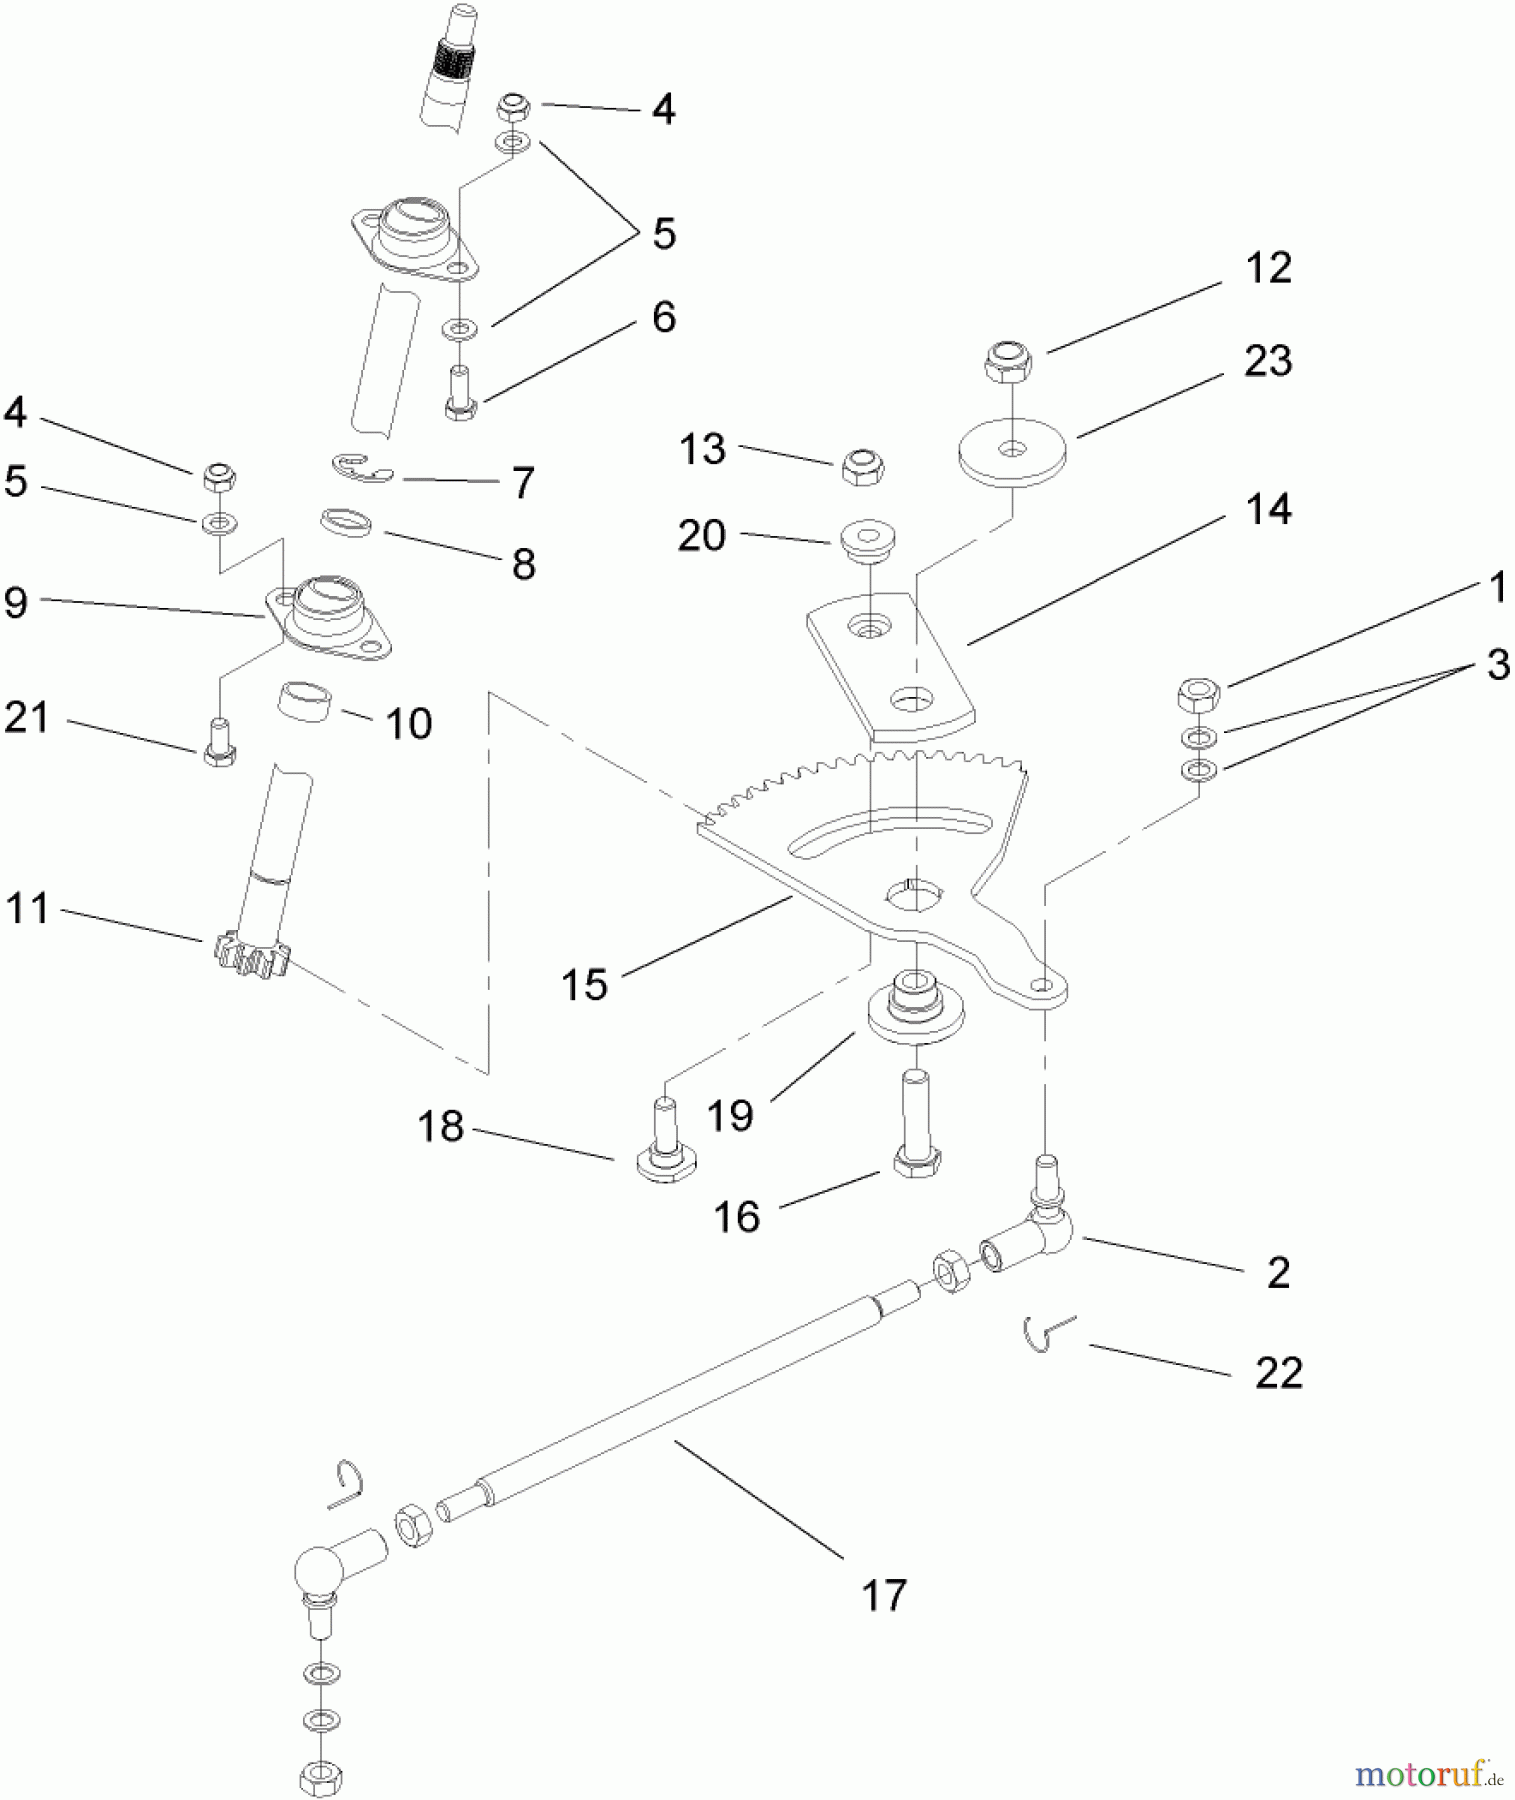  Toro Neu Mowers, Lawn & Garden Tractor Seite 1 74582 (DH 210) - Toro DH 210 Lawn Tractor, 2008 (280000001-280999999) STEERING ASSEMBLY